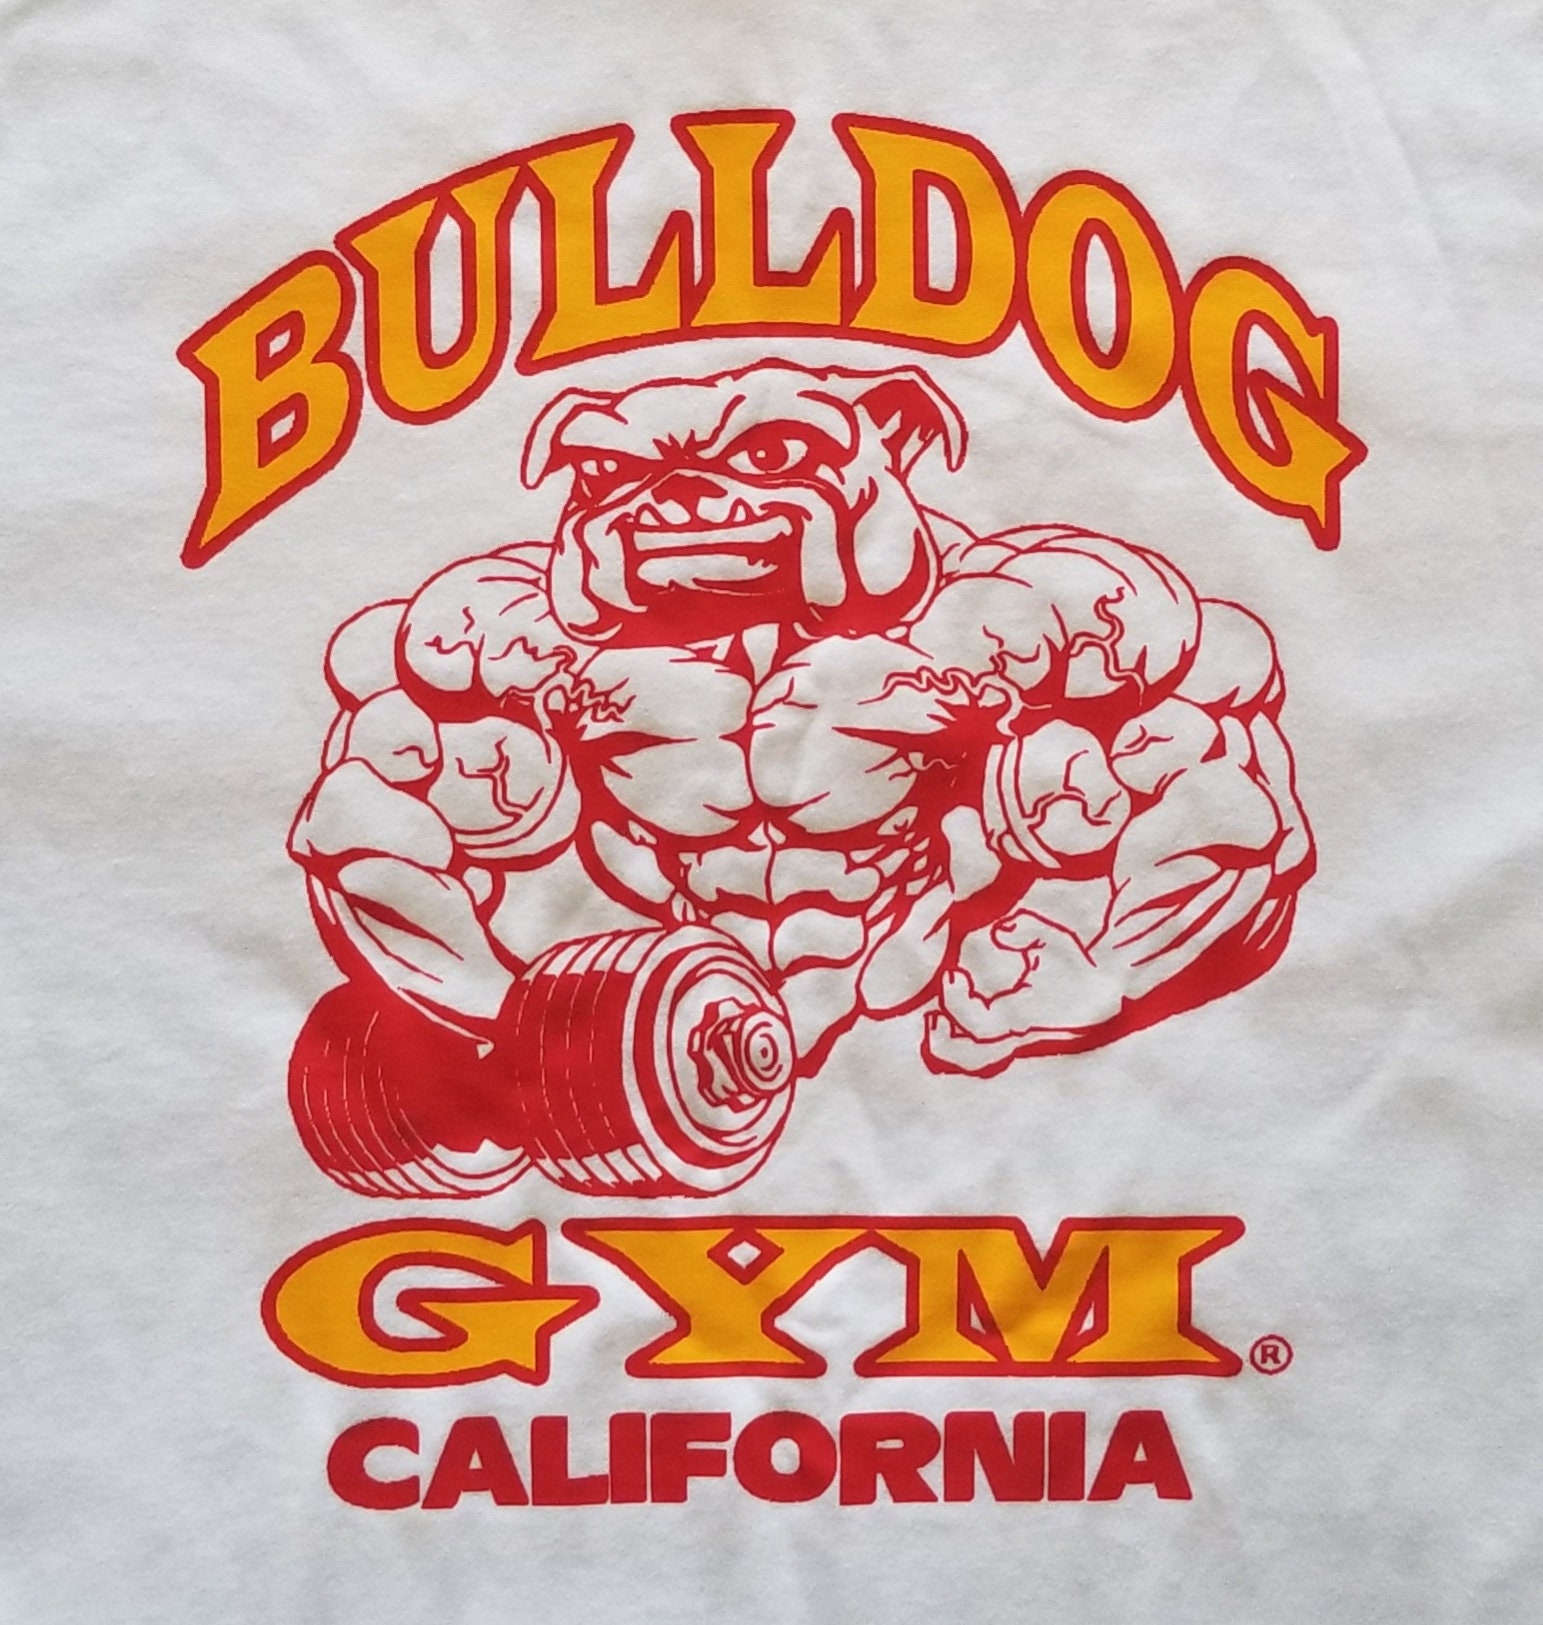 Bulldog Gym California Muscle Bodybuilding Workout Exercise White / Red /  Vintage Gold Ringer T-shirt Brand New Size M L XL -  Norway